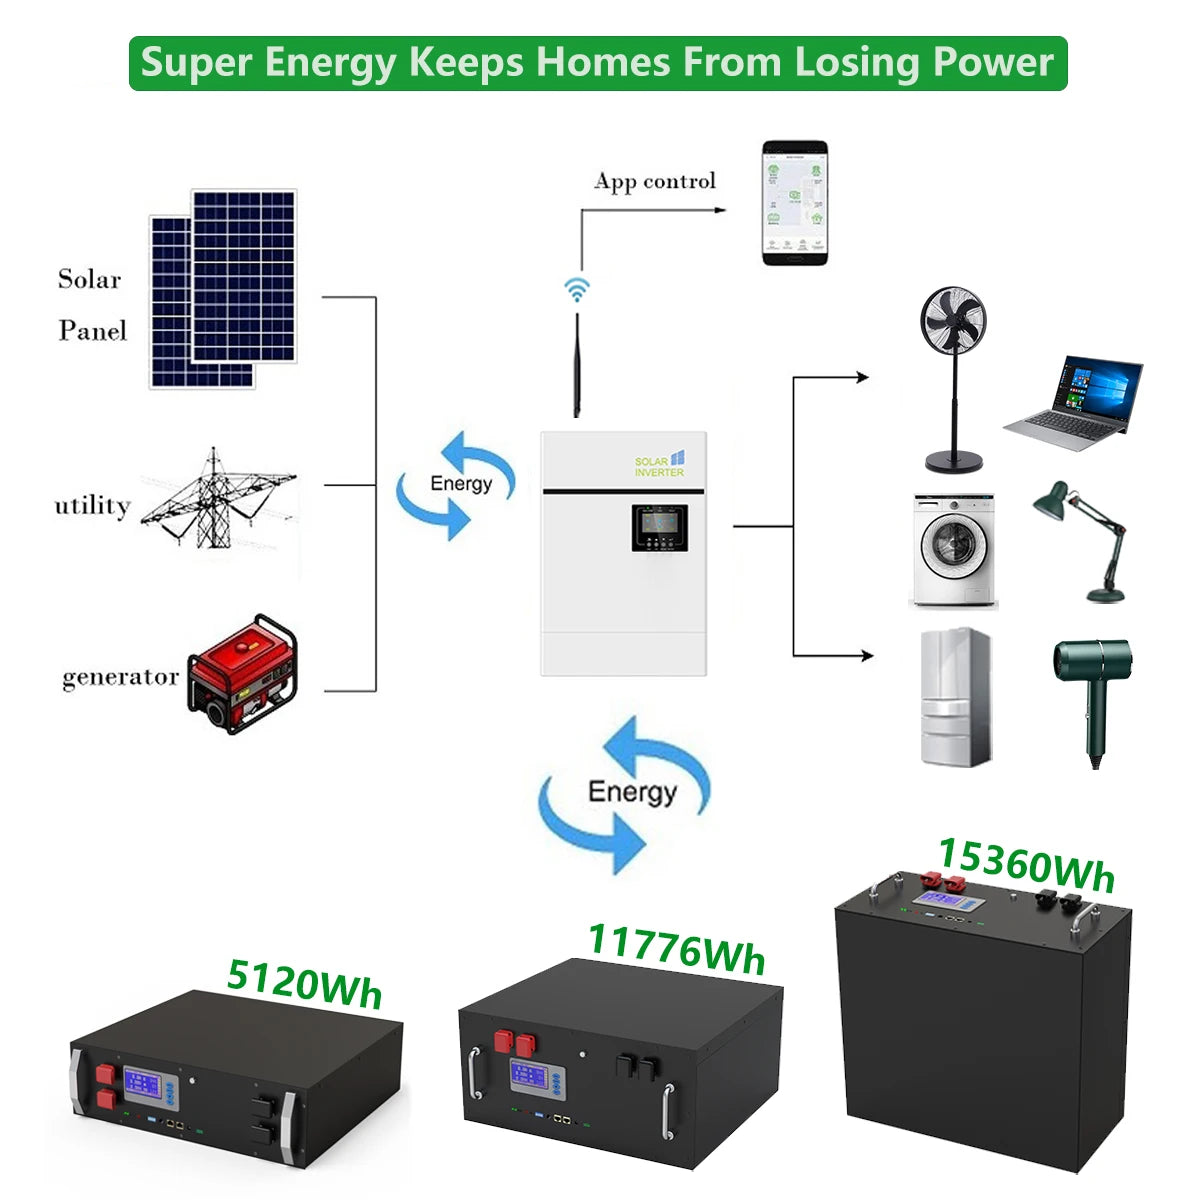 48V 200Ah 100Ah LiFePO4 Battery, Lithium-ion battery pack for home energy storage, solar panels, and backup power.